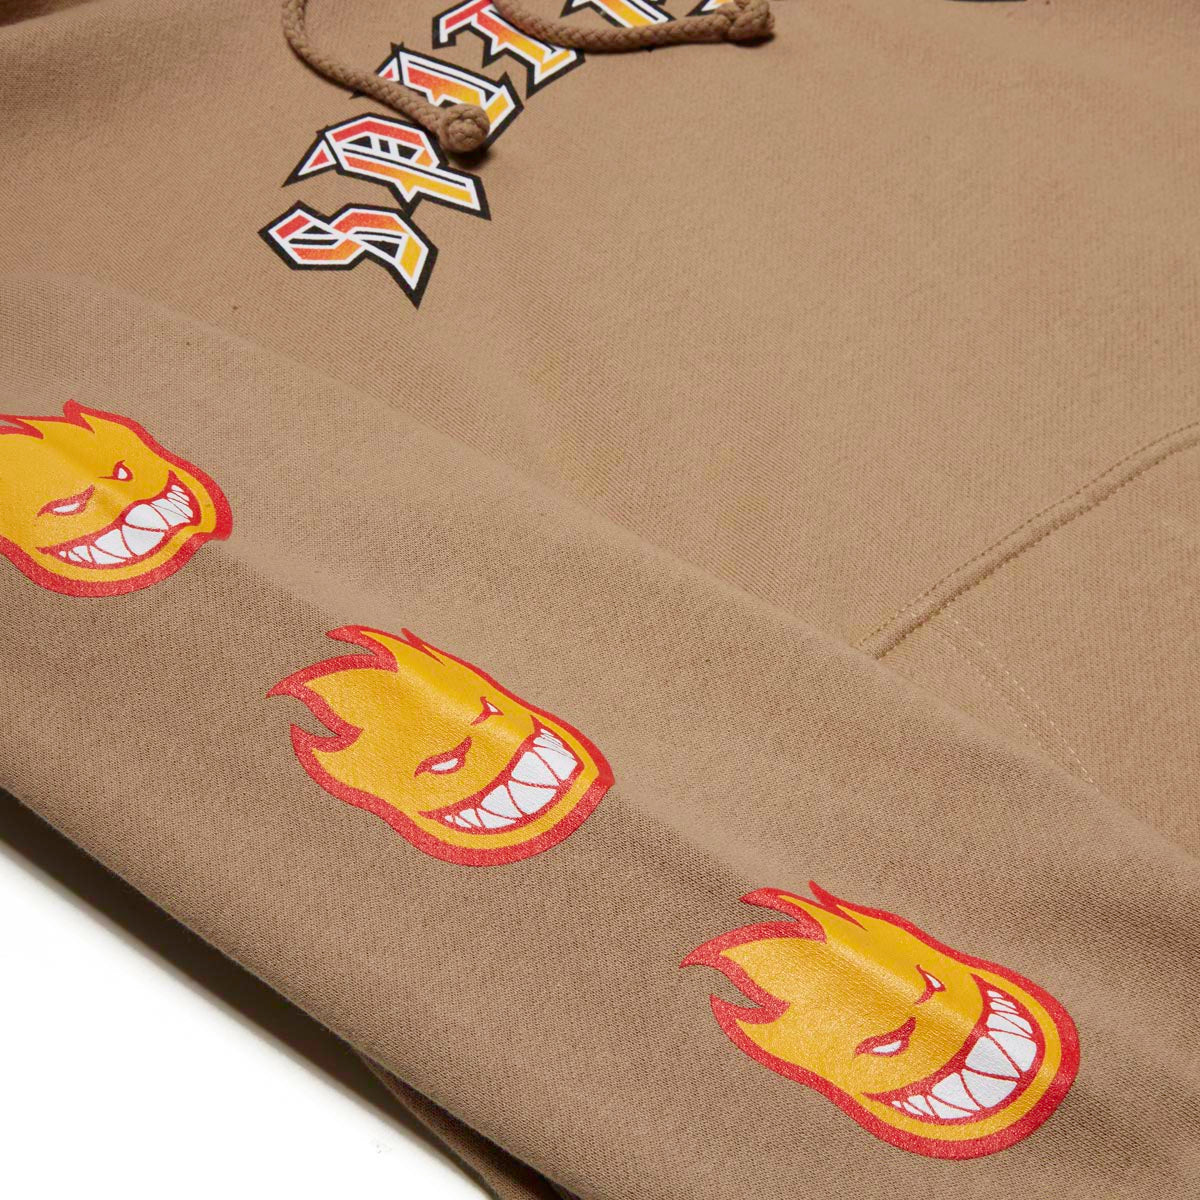 Spitfire Old E Bighead Fill Sleeve Hoodie - Sandstone/Gold/Red image 2